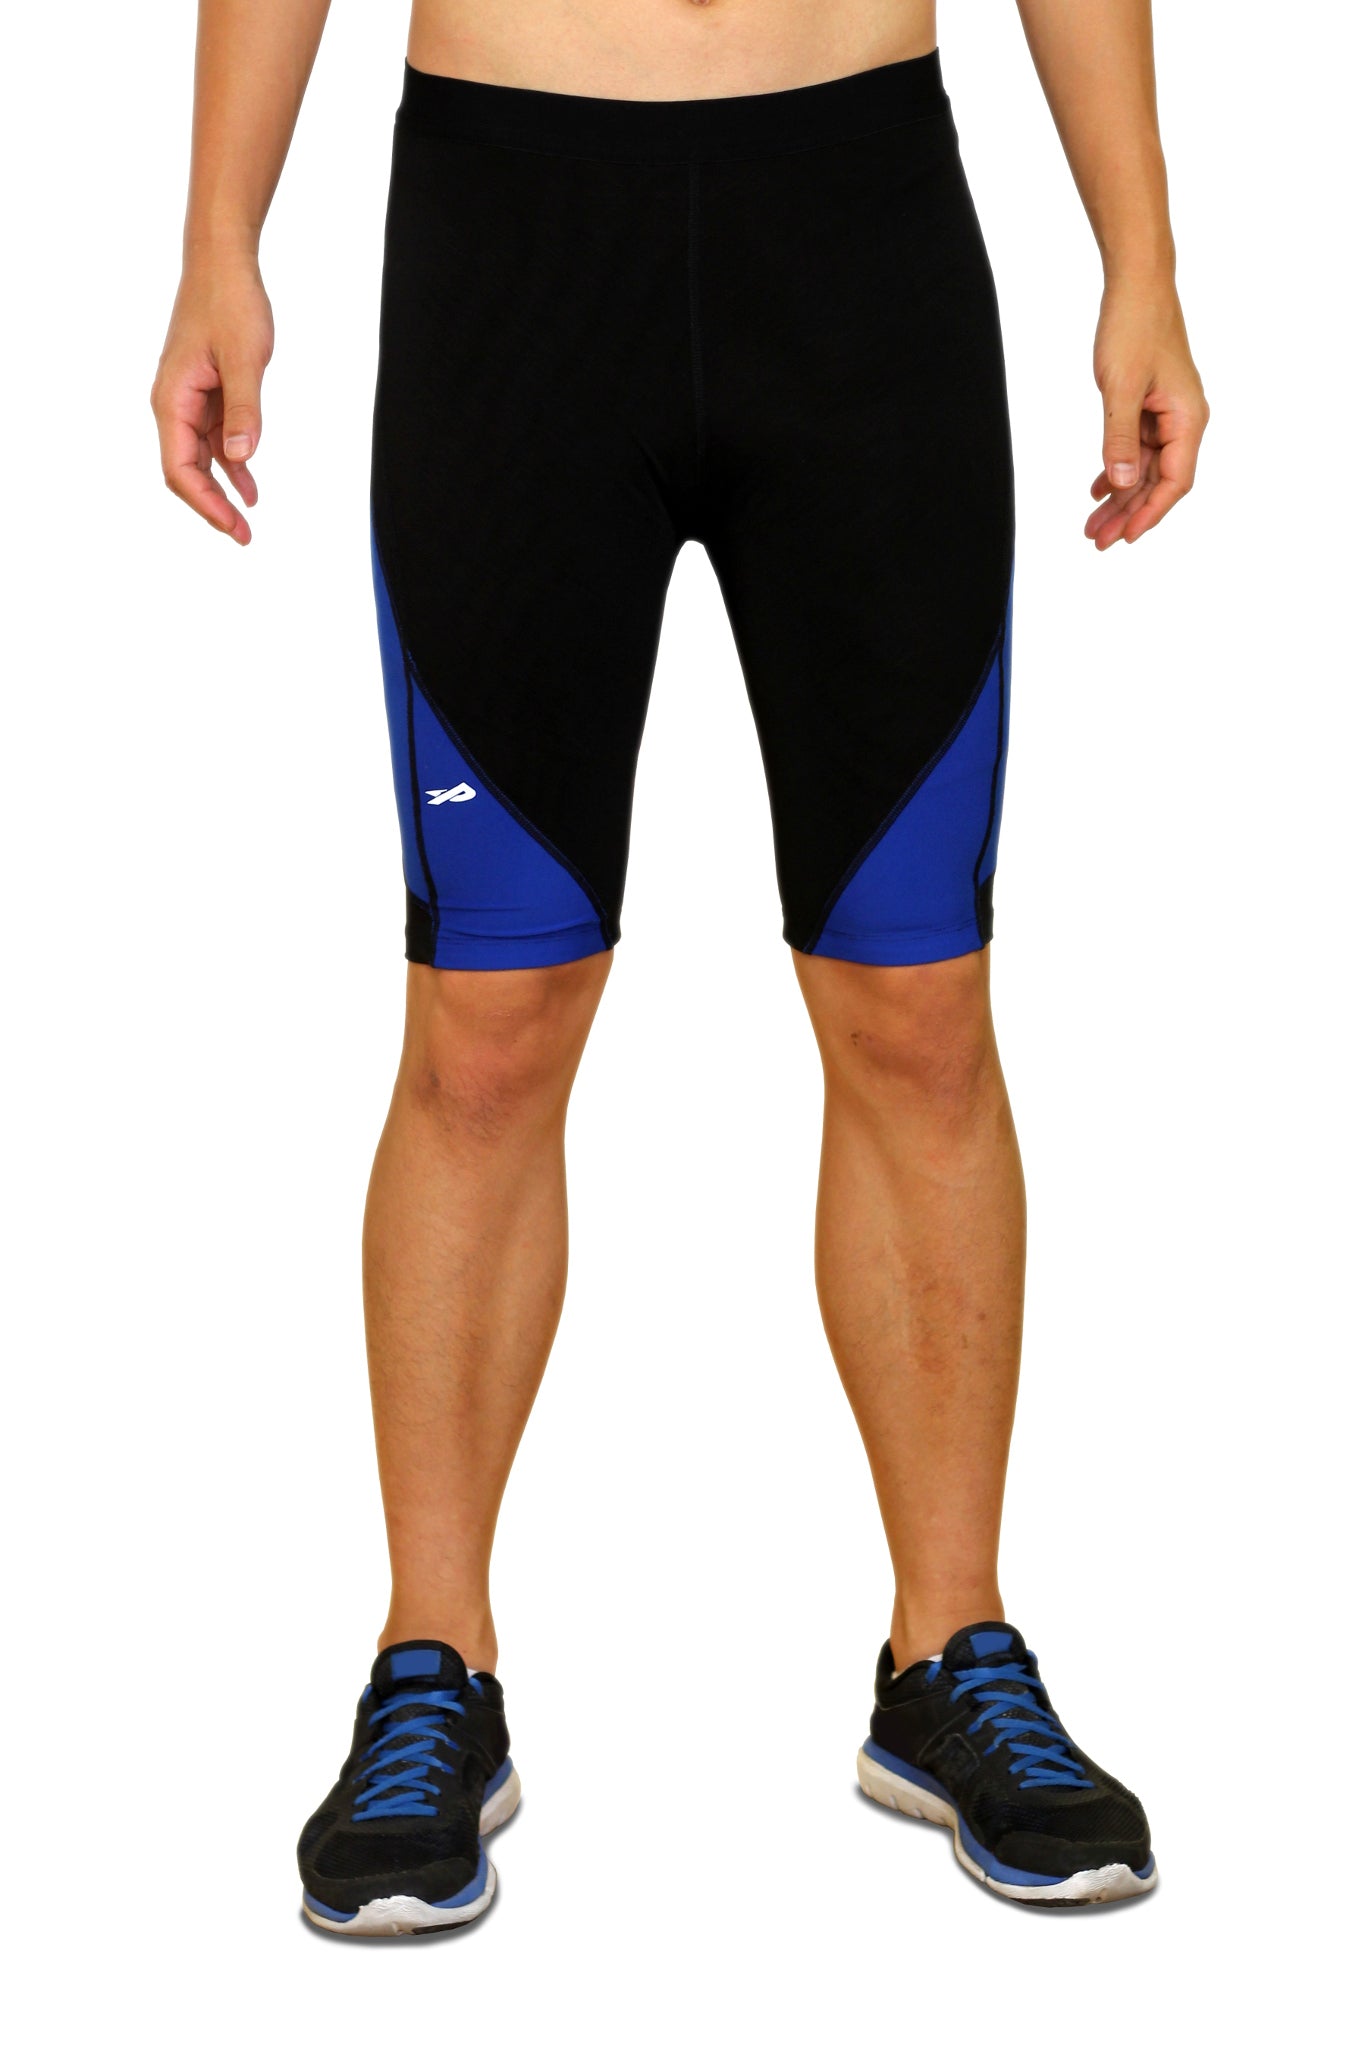 Pro Resistance Shorts for Men - Navy Blue – Physiclo